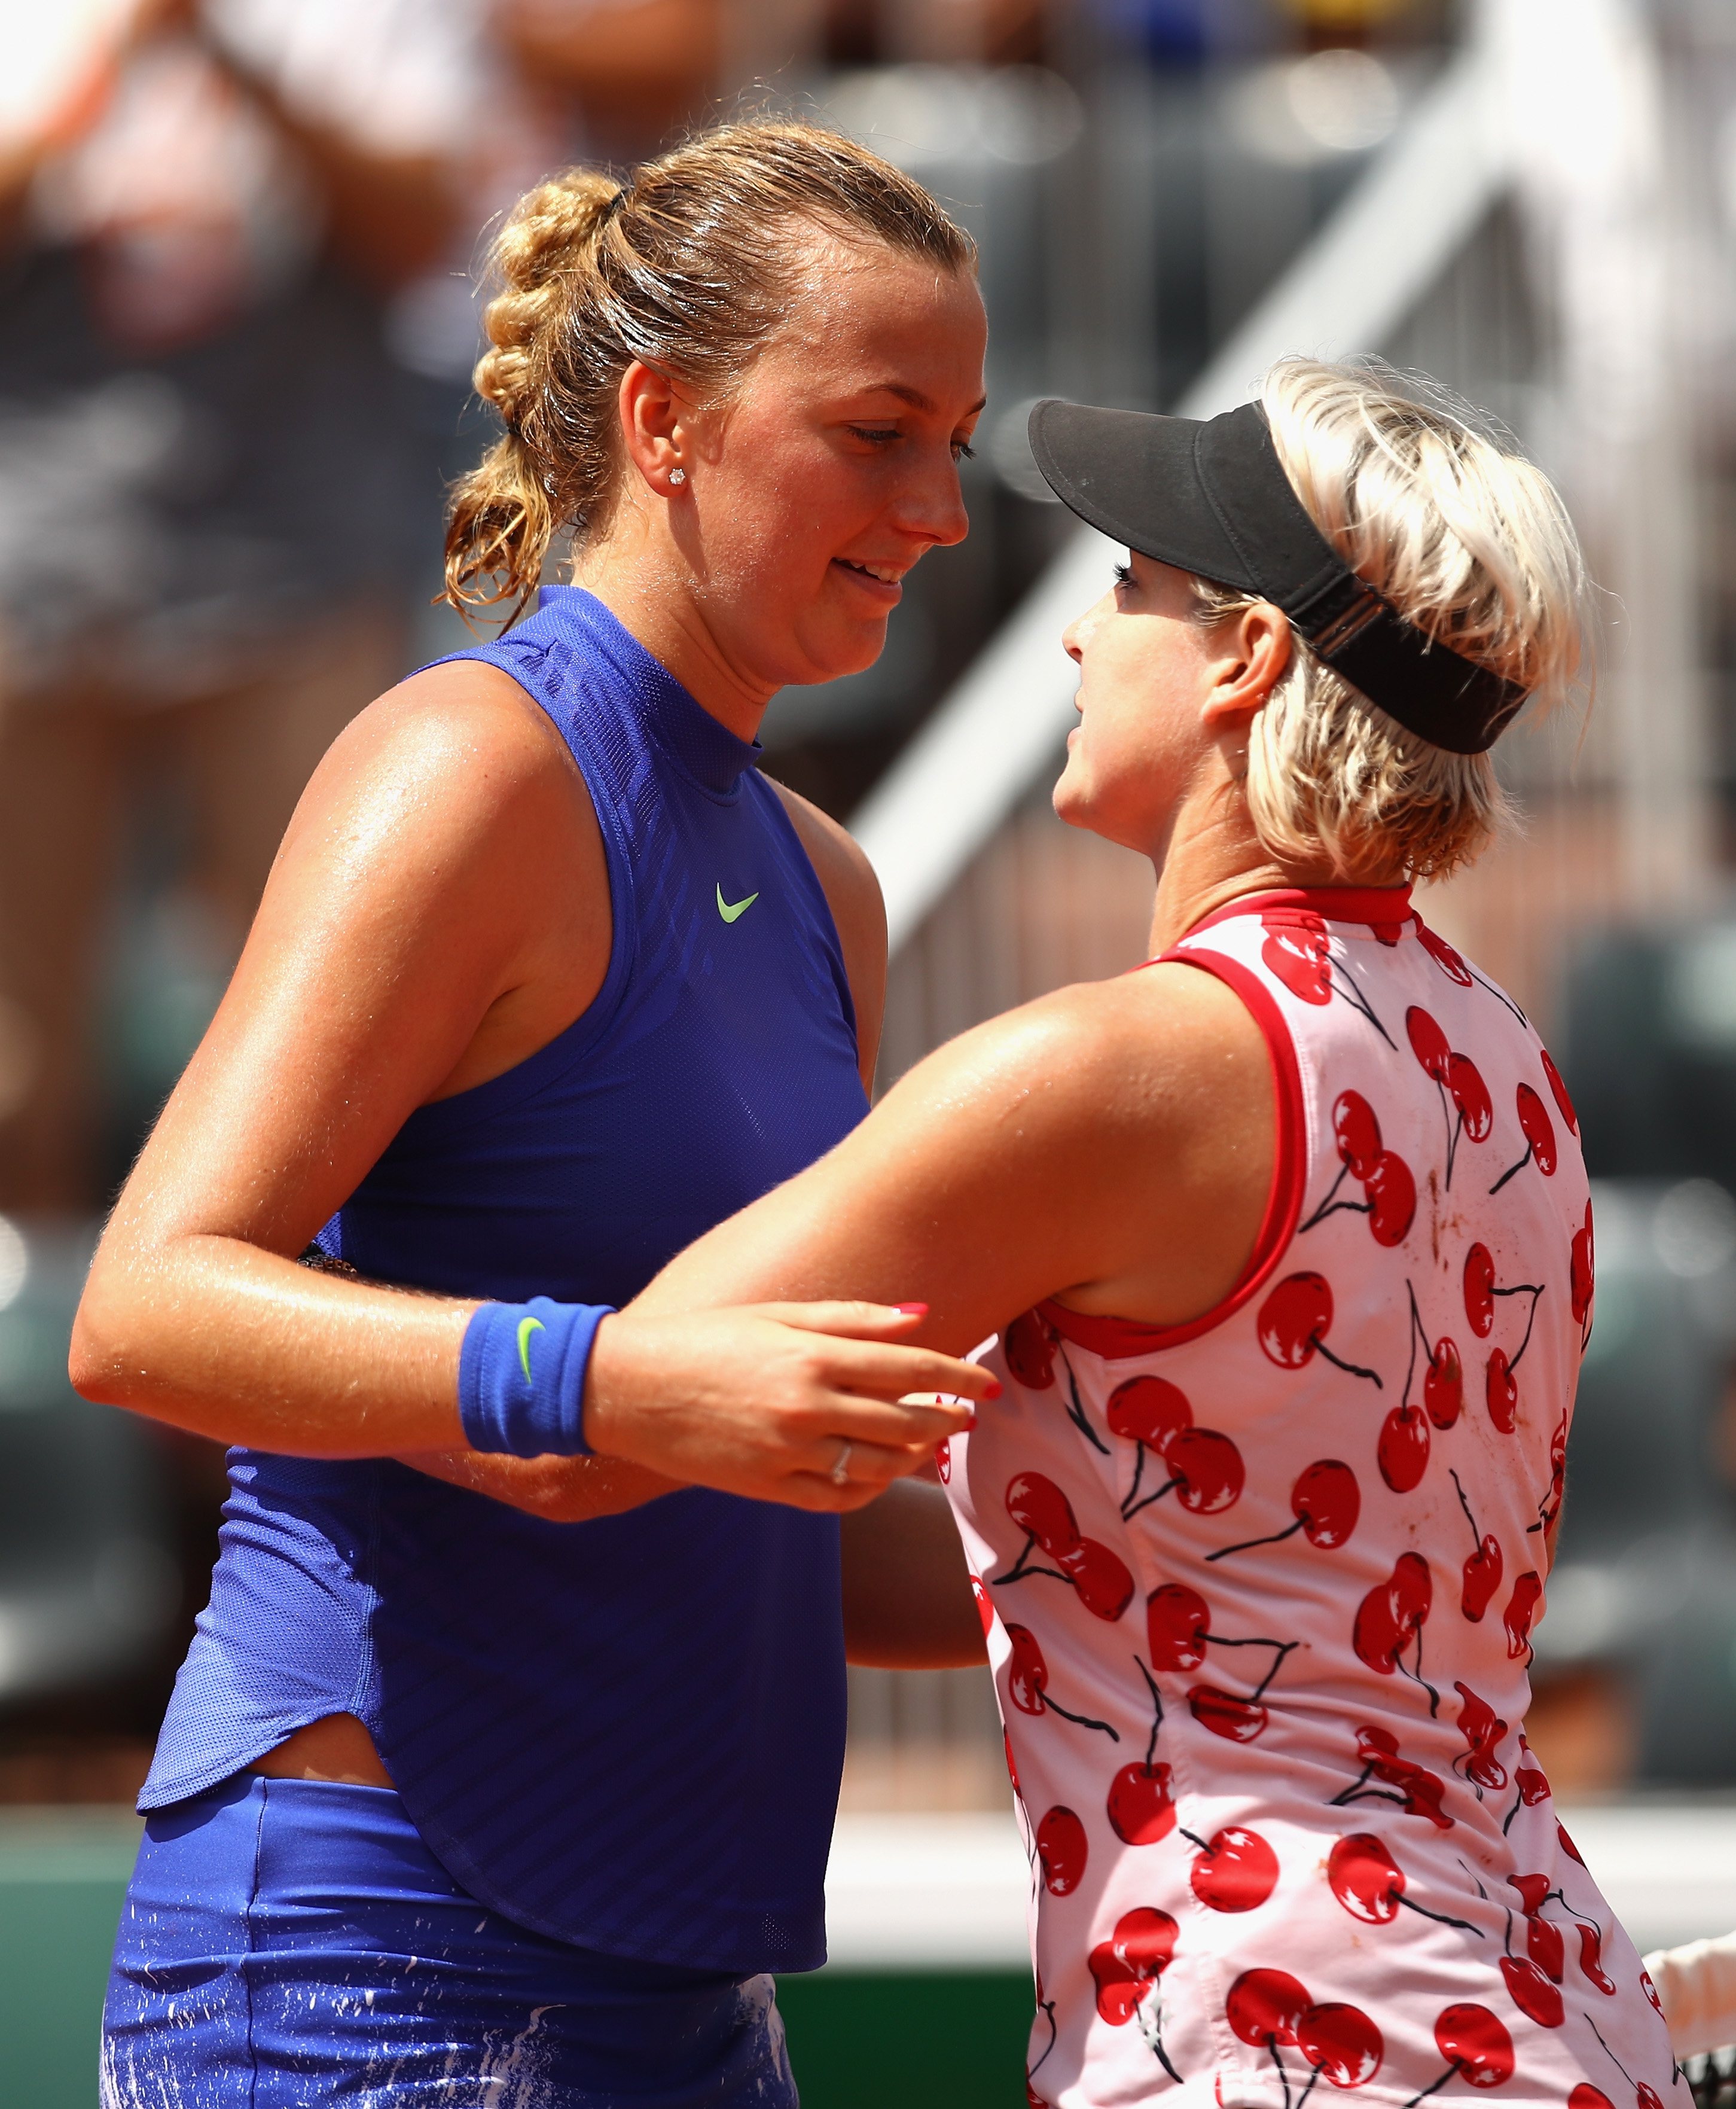 PARIS, FRANCE - MAY 31: Petra Kvitova of The Czech Republic congratulates Bethanie Mattek-Sands of The United States on victory following the ladies singles second round match on day four of the 2017 French Open at Roland Garros on May 31, 2017 in Paris, France. (Photo by Clive Brunskill/Getty Images)